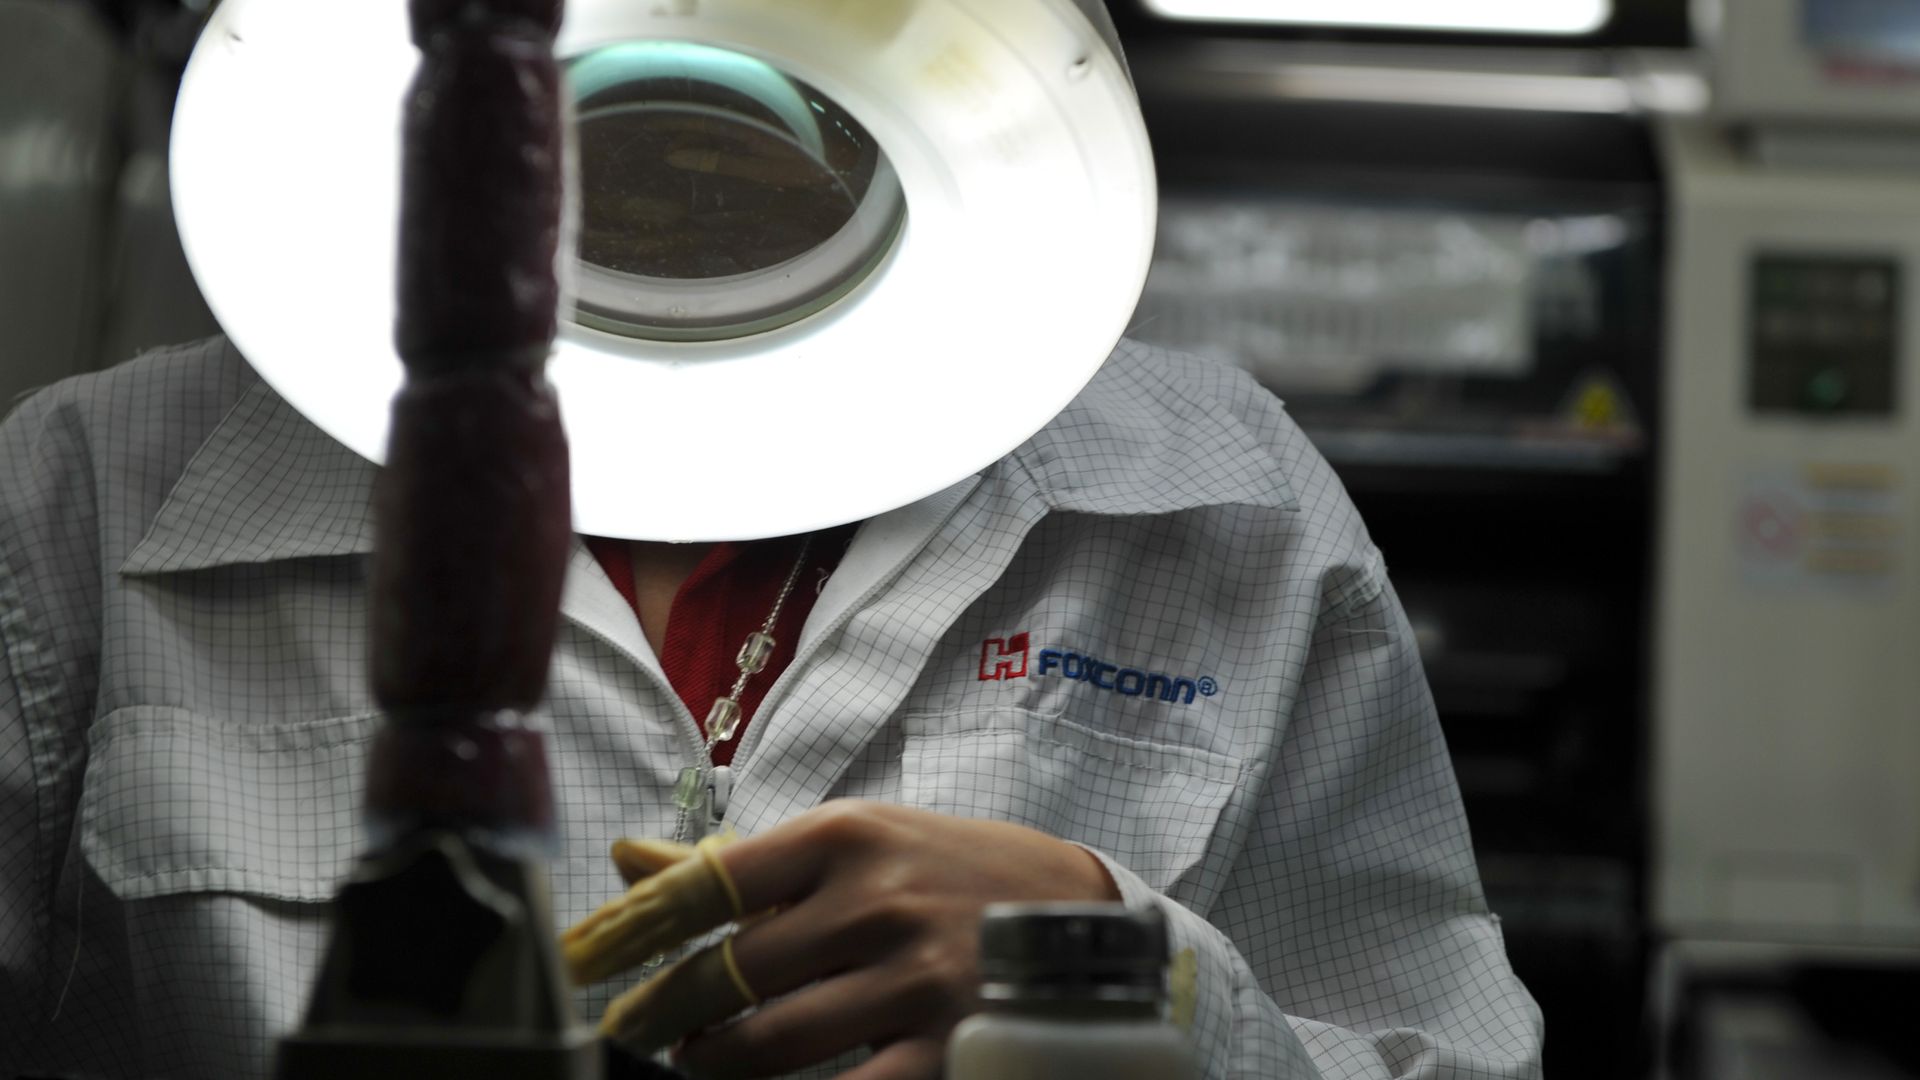 A worker on a factory line at the Foxconn plant in Shenzen